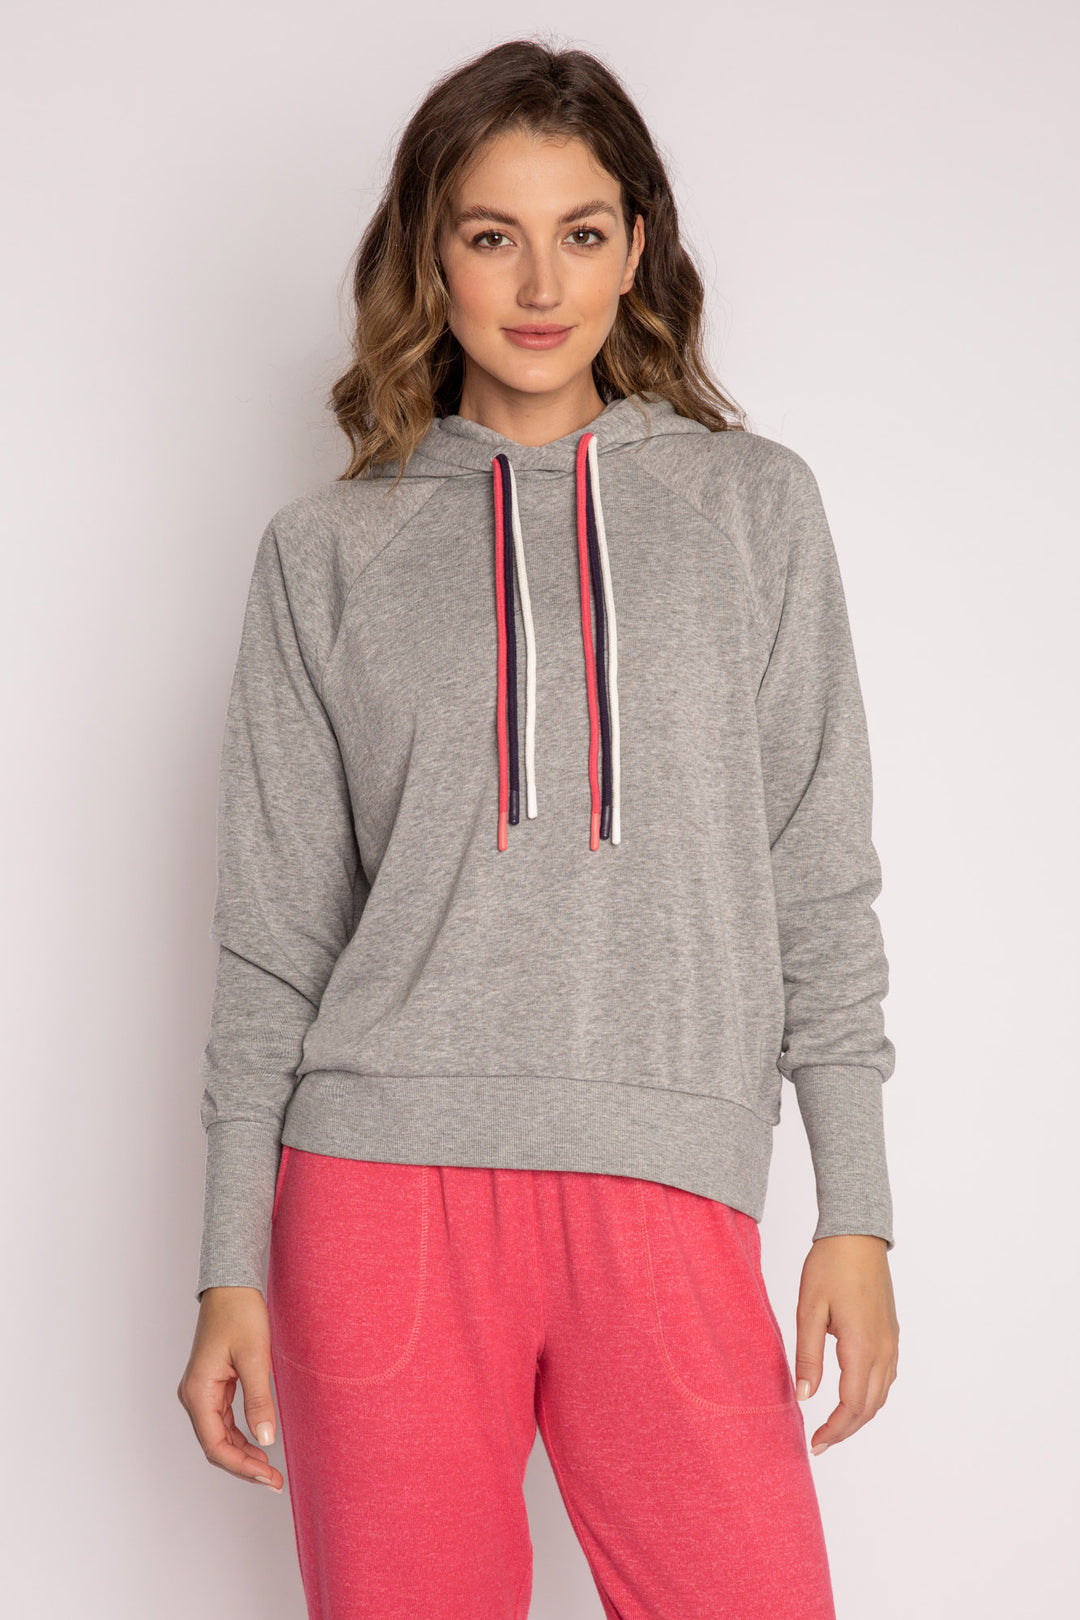 Heather grey hoodie with multi-colored drawcord. (7125189623908)